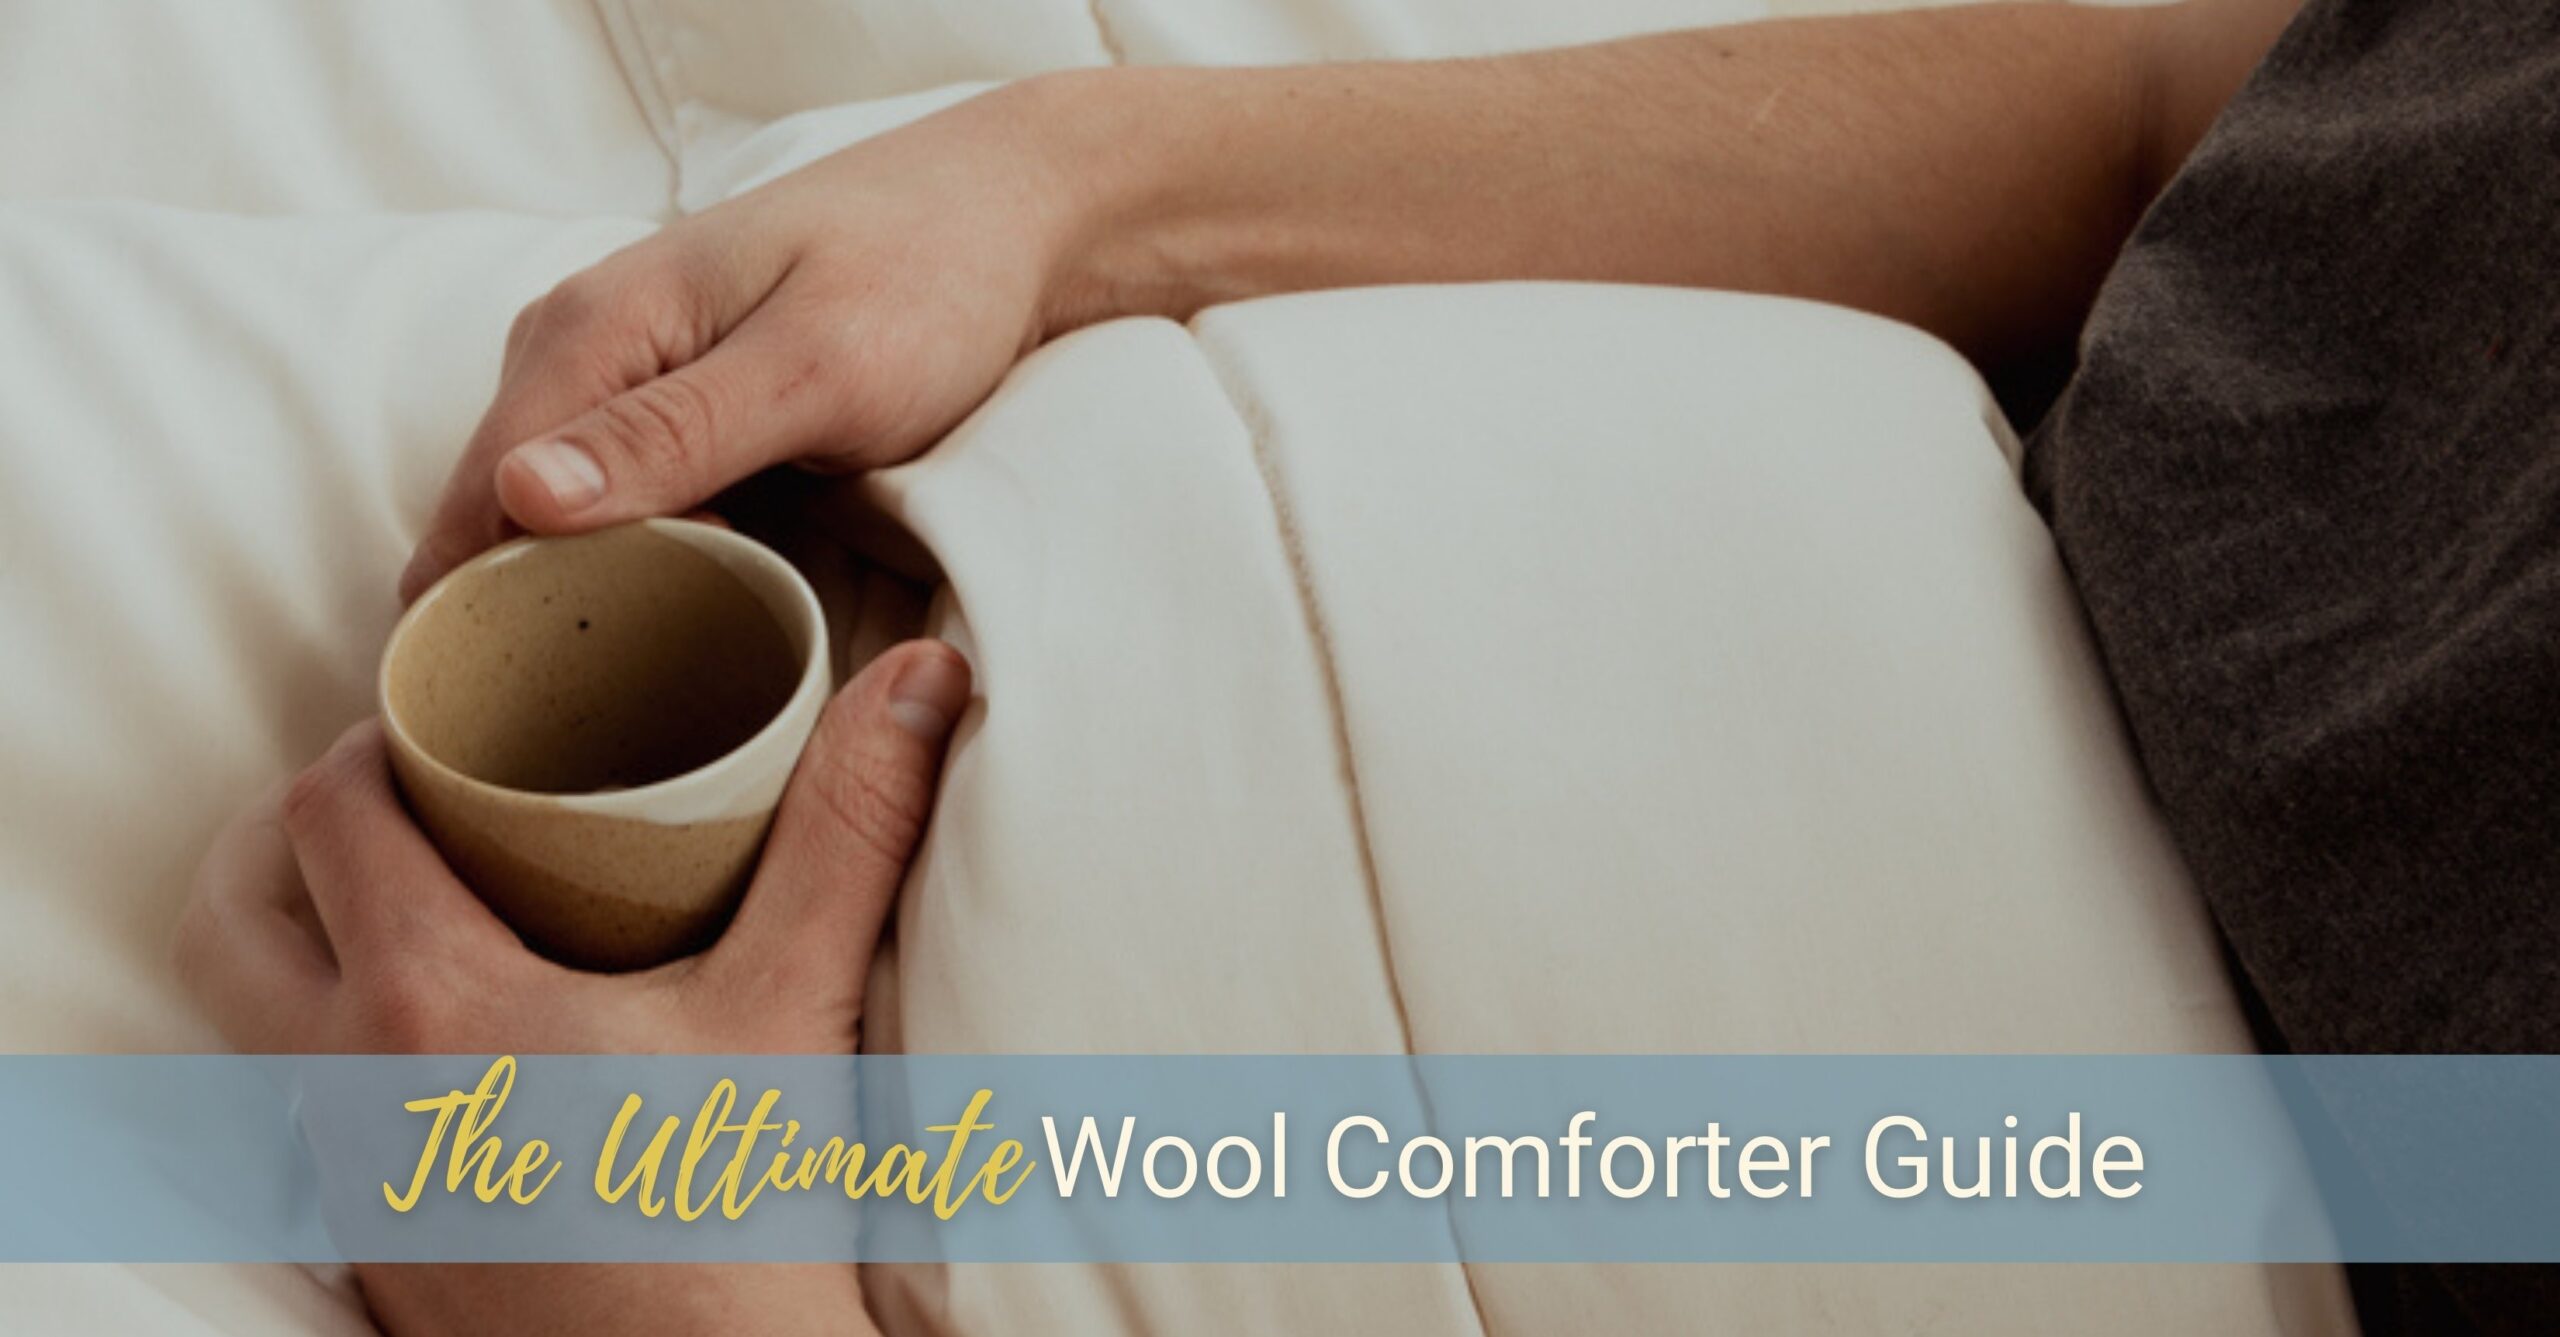 We see someone's arms resting on their wool comforter while in bed, relaxing with a cup of coffee.